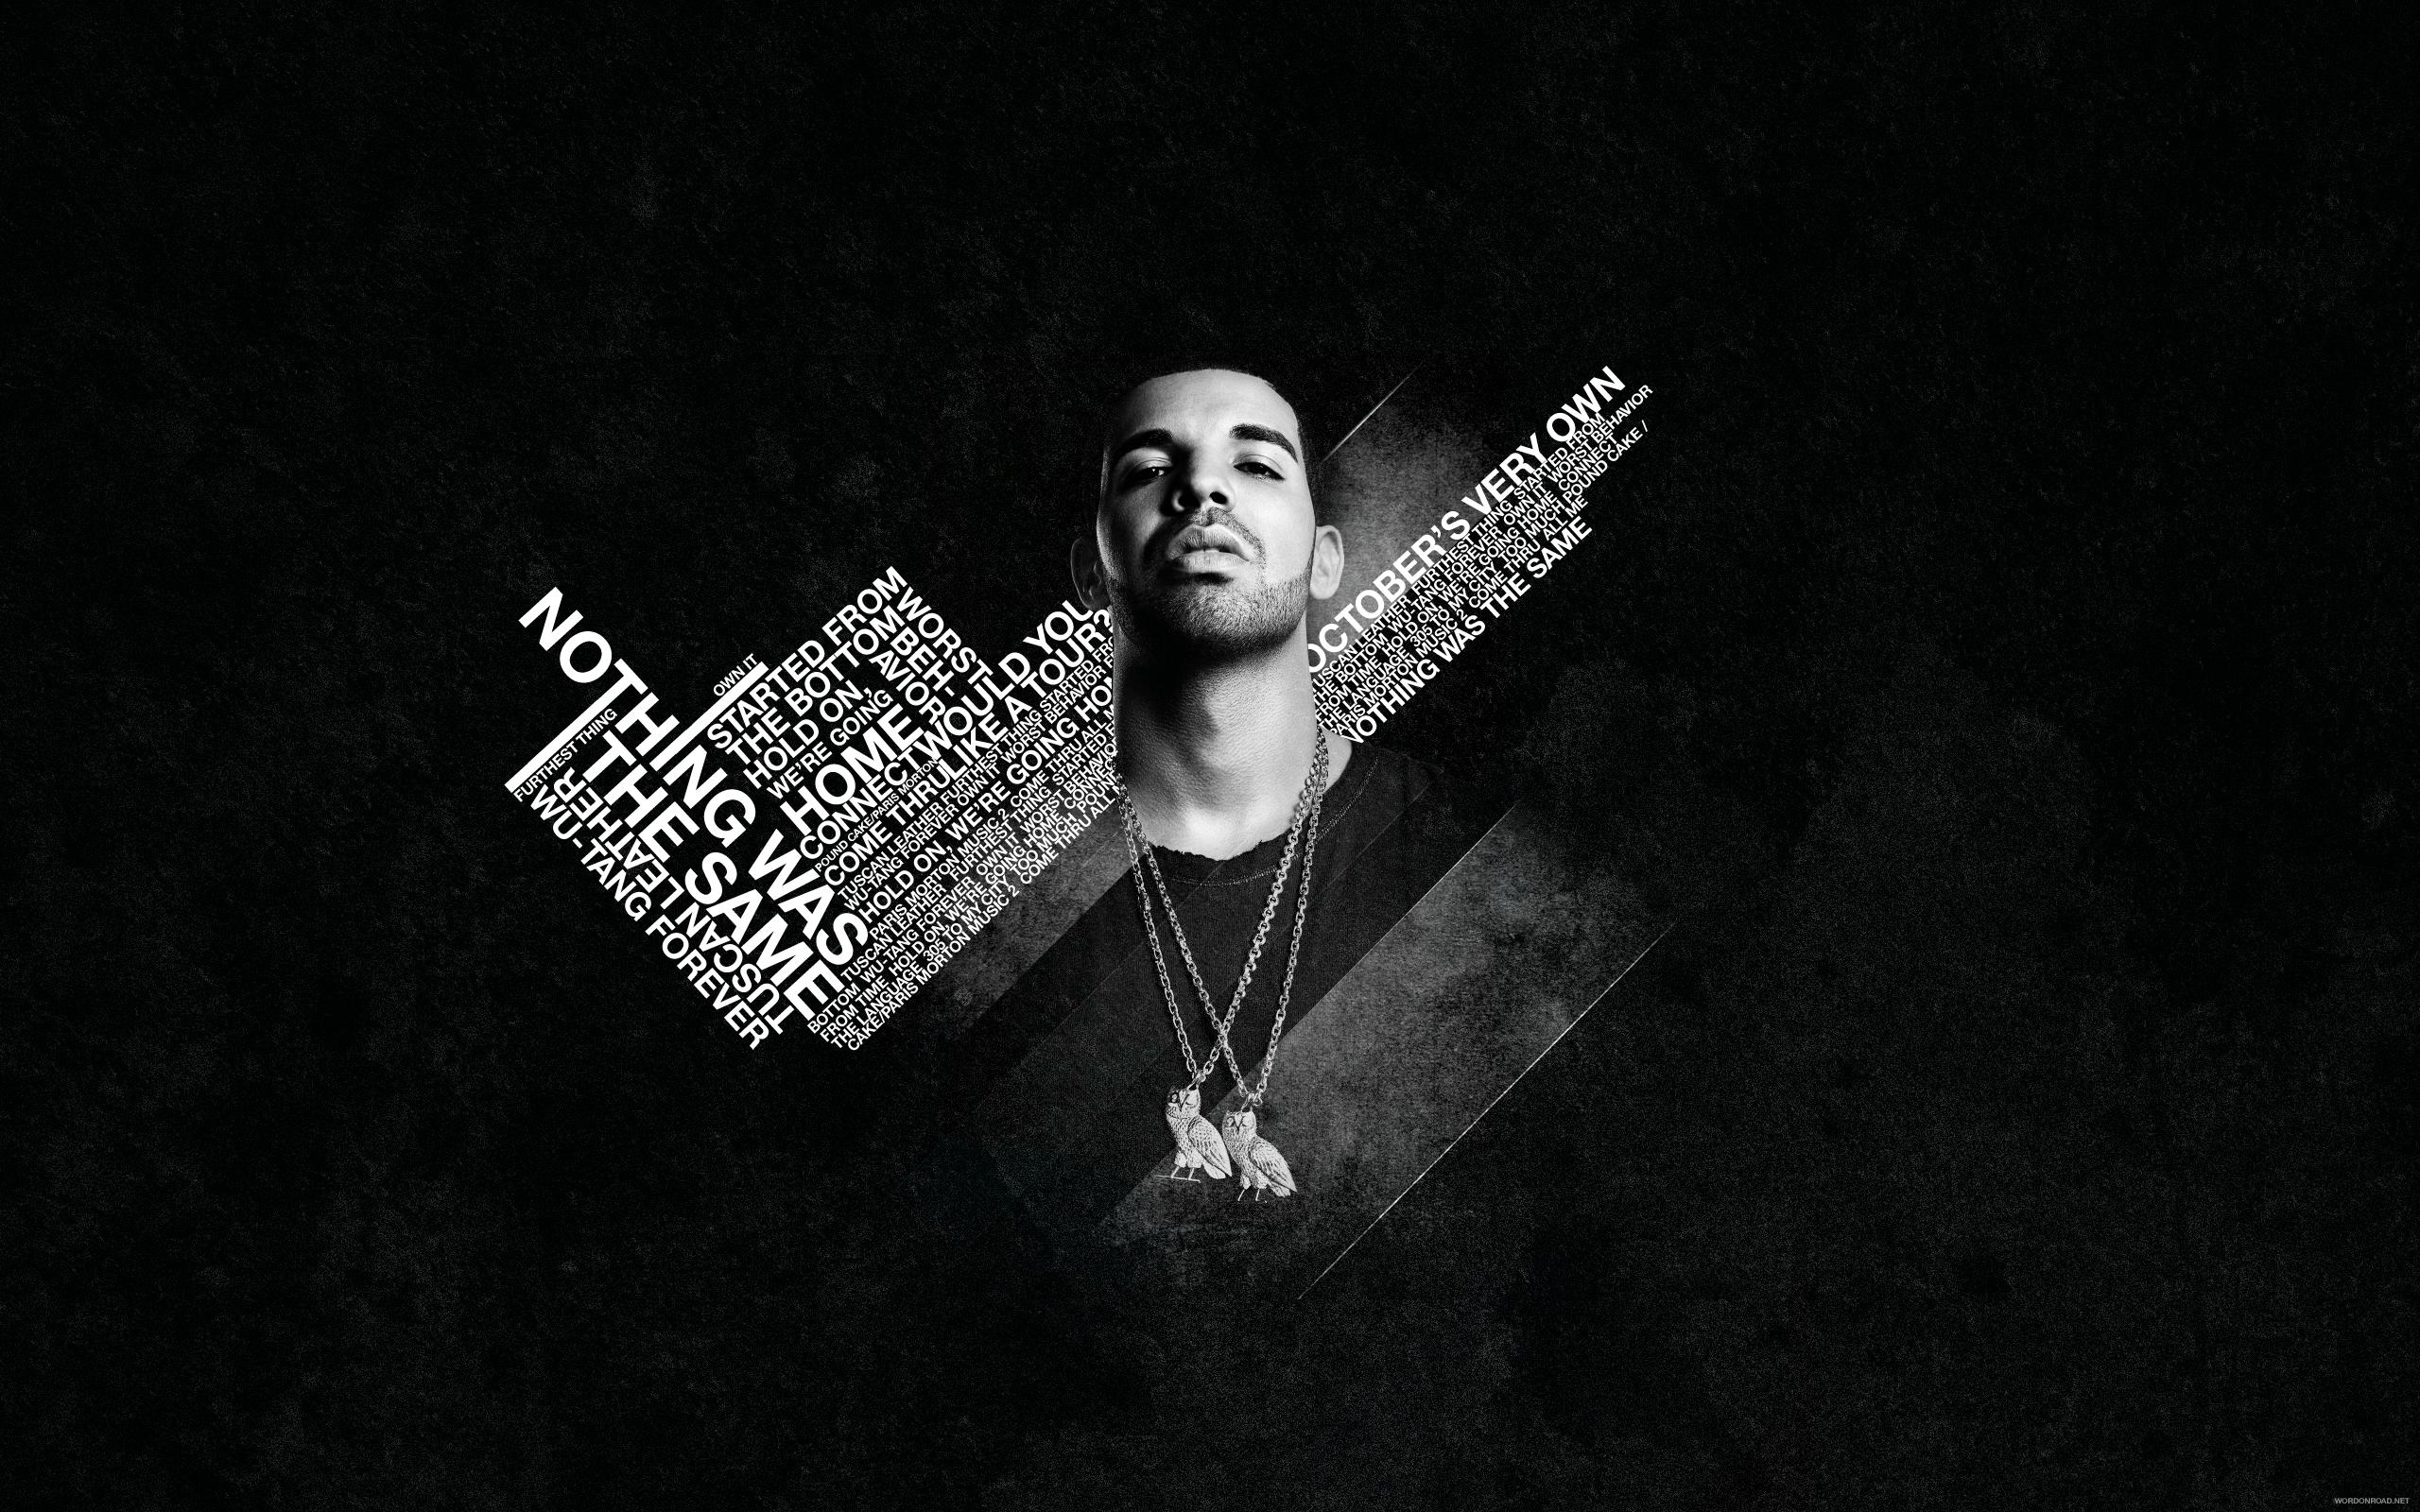 The wallpaper is a black and white photo of an artist - Drake